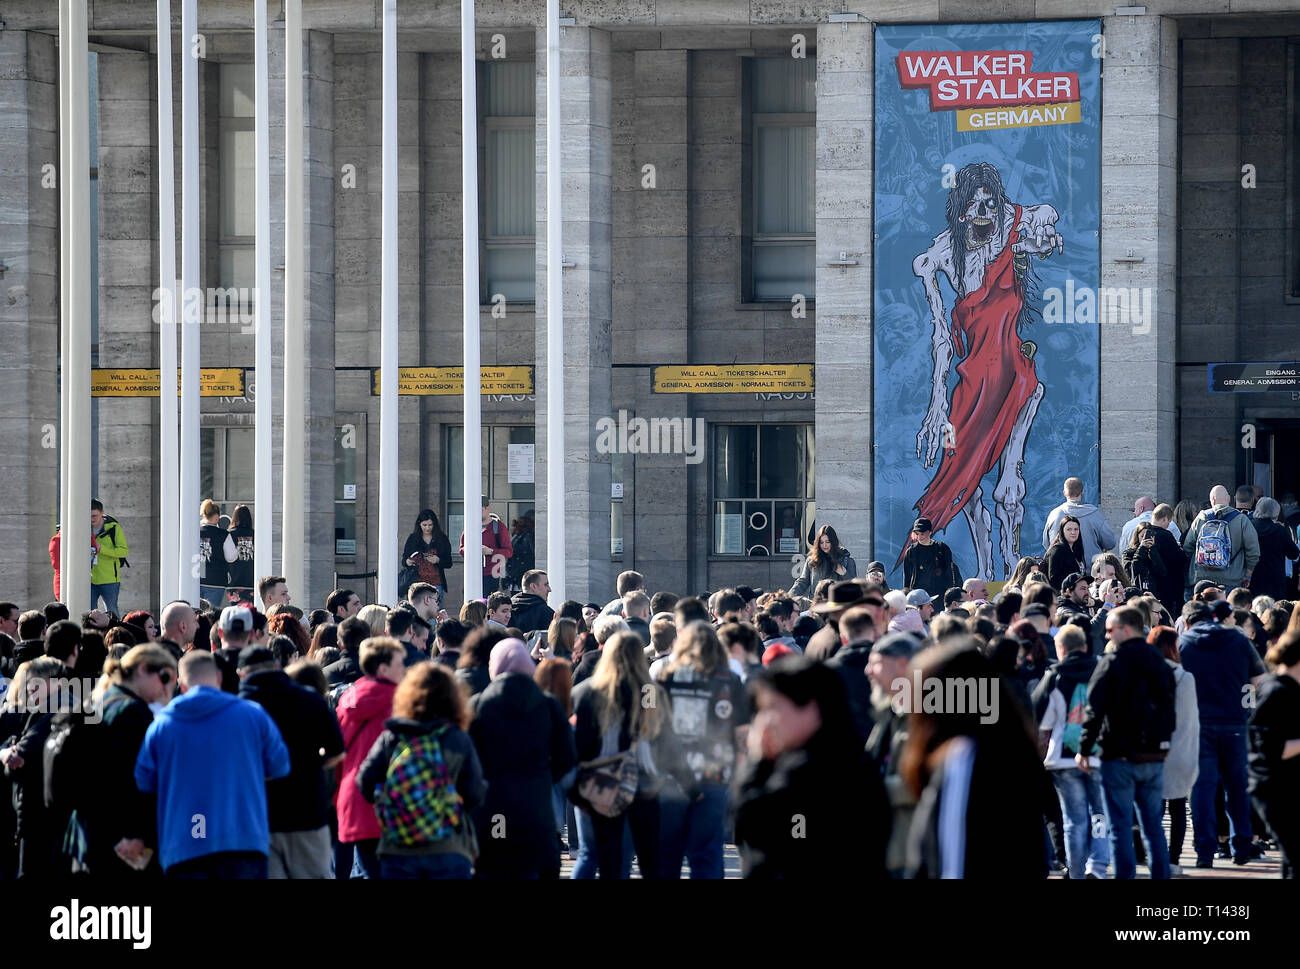 Berlin, Germany. 23rd Mar, 2019. Crowd at the 'Walker Stalker Con' fair. At the meeting for fans of the series 'Game of Thrones' and 'The Walking Dead' fans can meet their idols. Credit: Britta Pedersen/dpa-Zentralbild/dpa/Alamy Live News Stock Photo